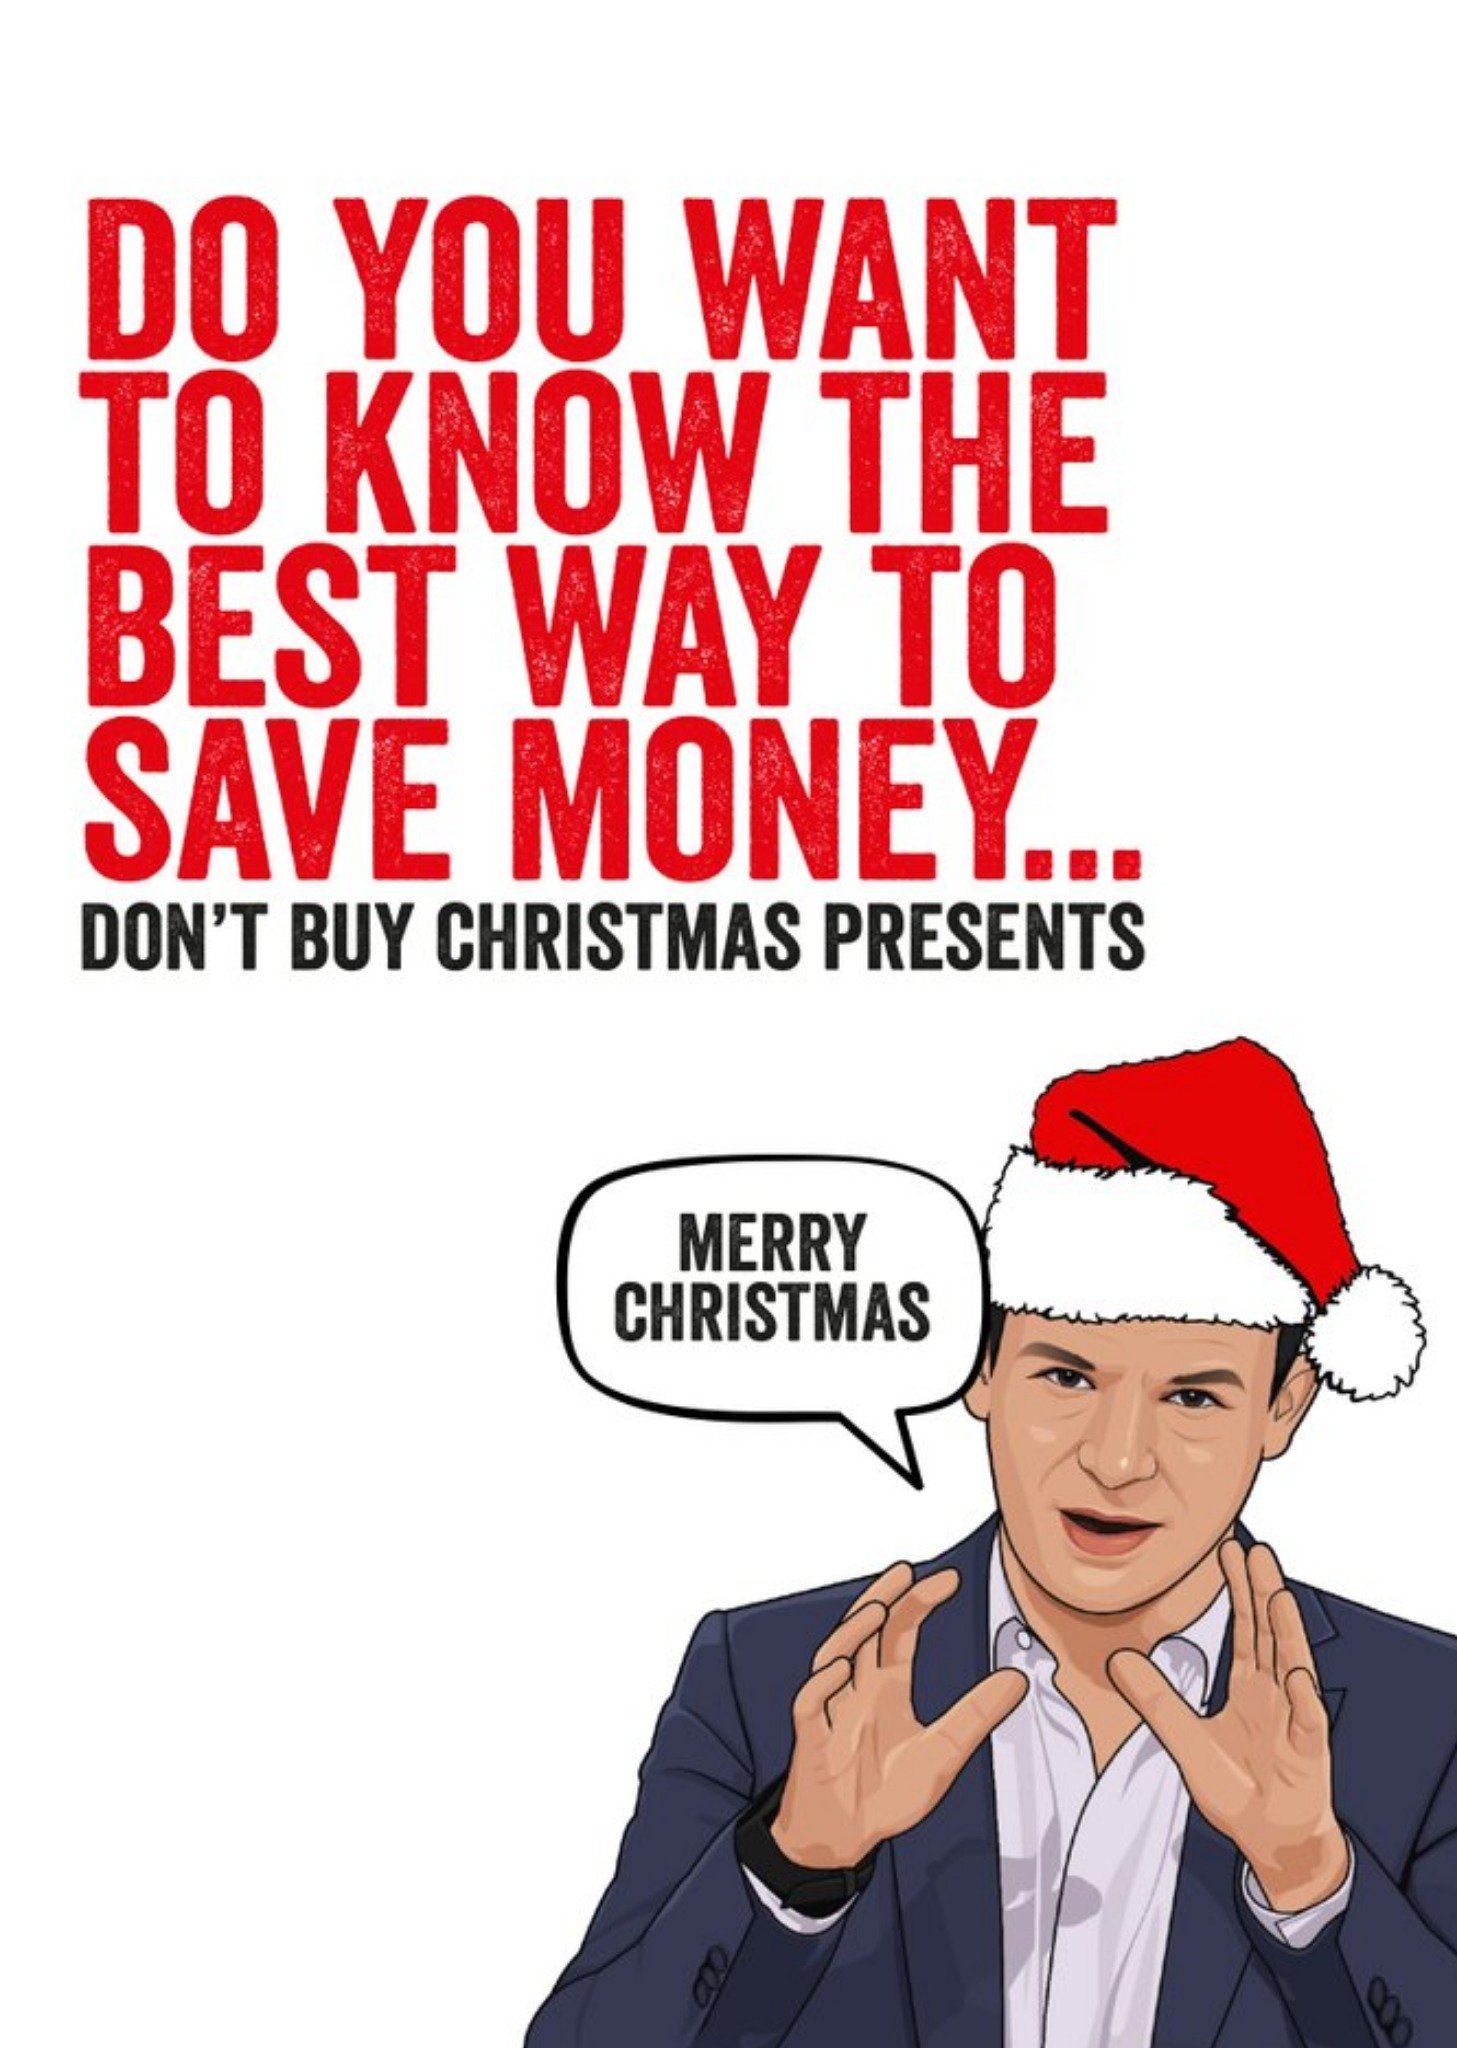 Moonpig Illustration Of A Famous Financial Journalist And Broadcaster Funny Christmas Card Ecard